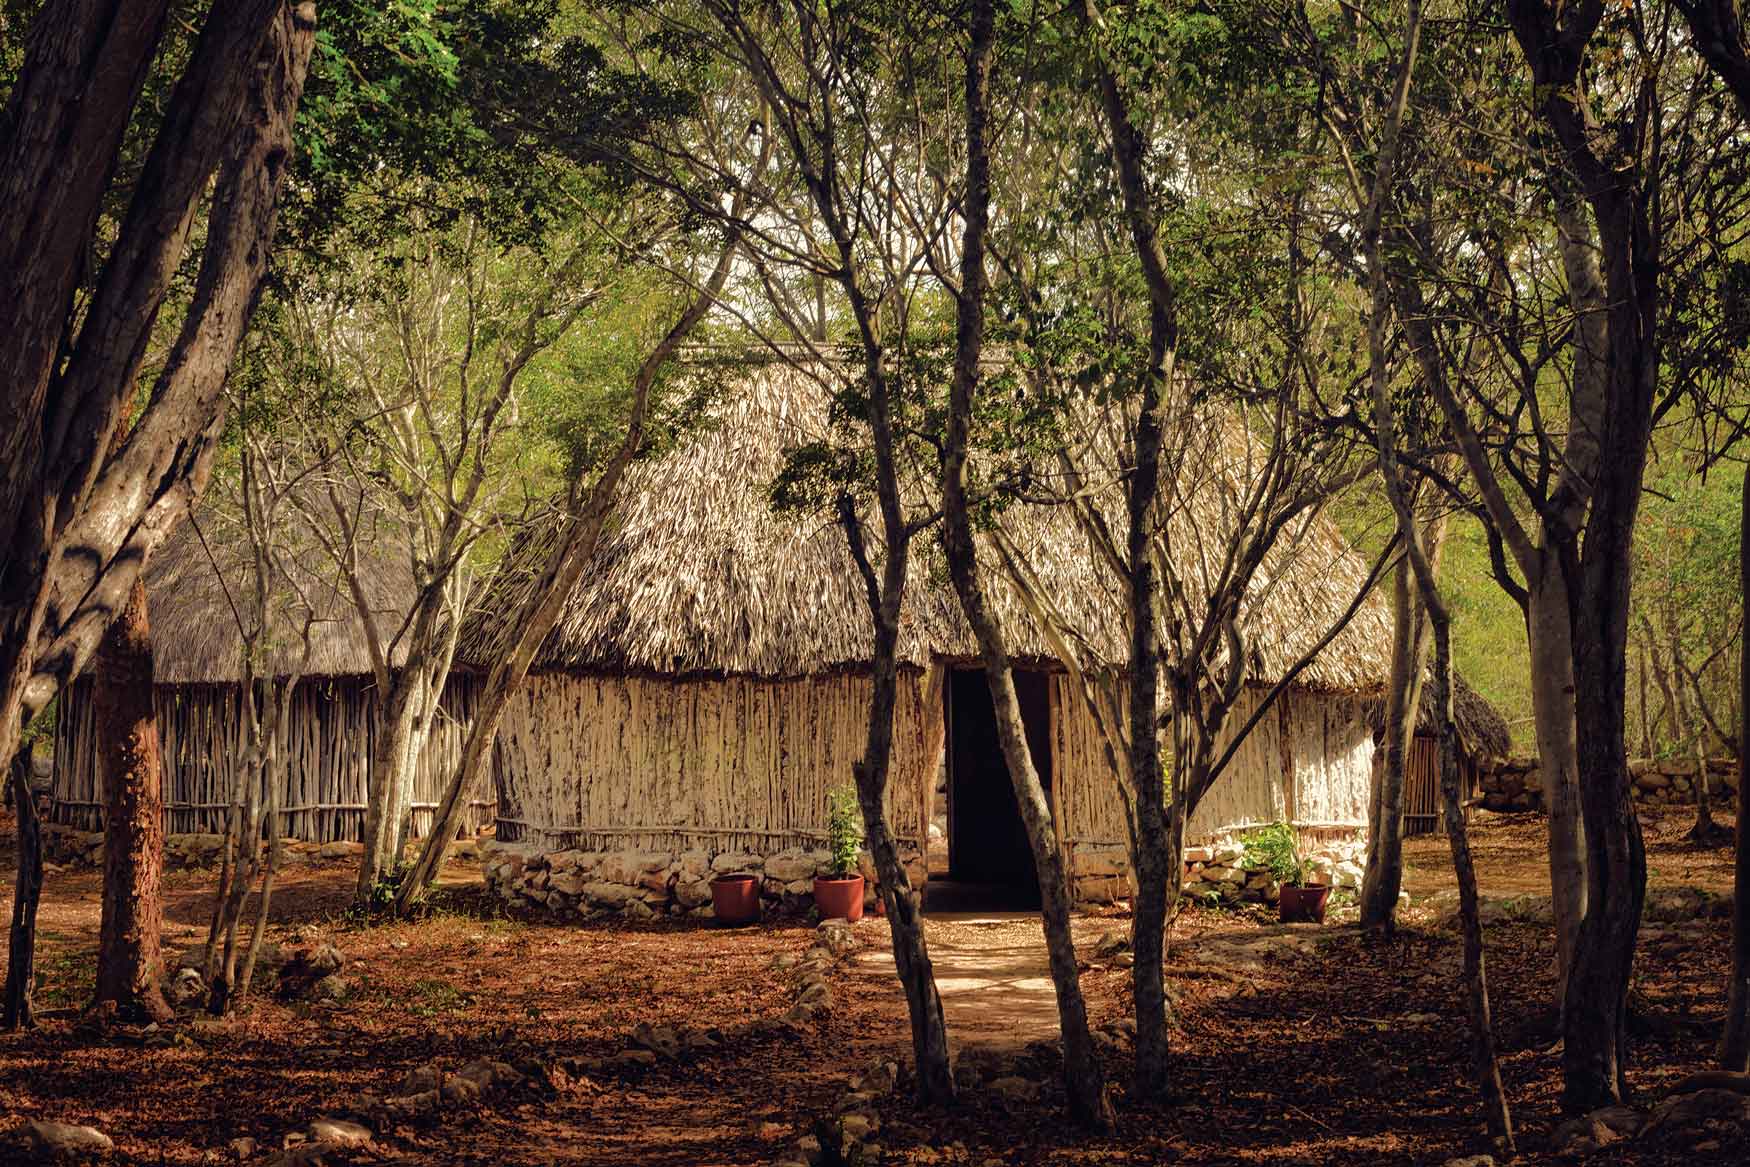 The mayan house